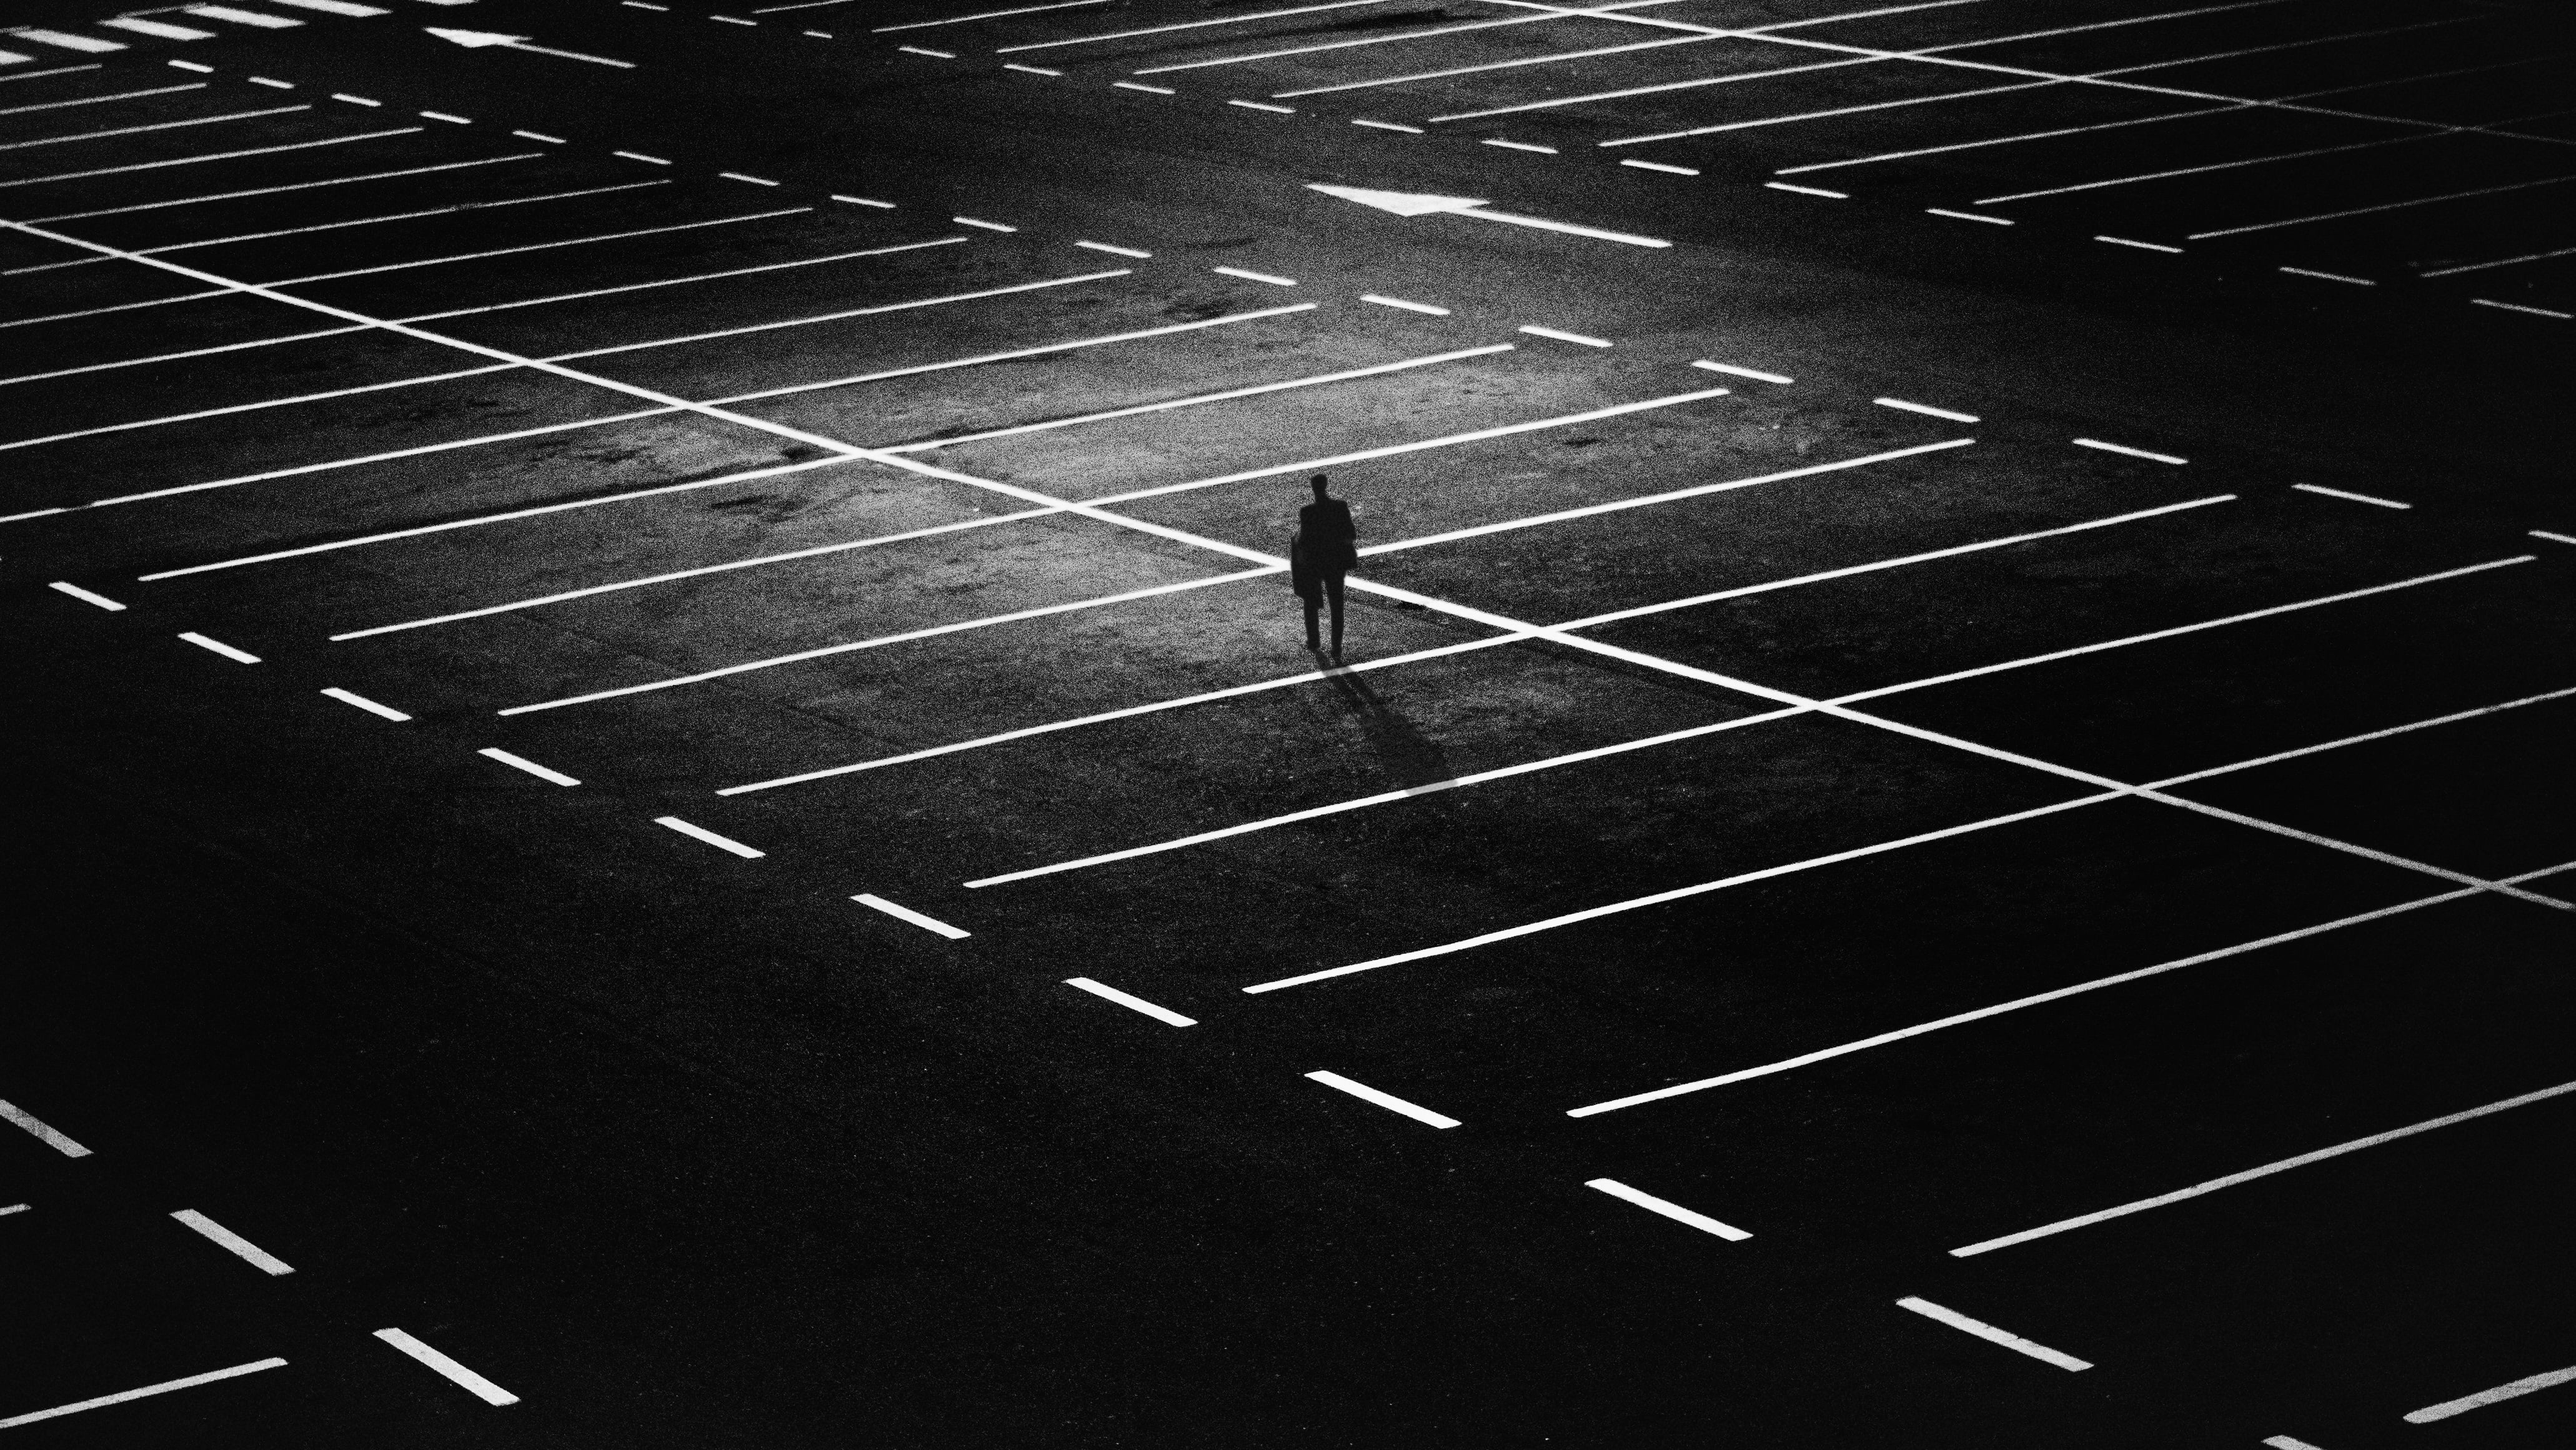 silhouette of person standing on parking lot in grayscale photography